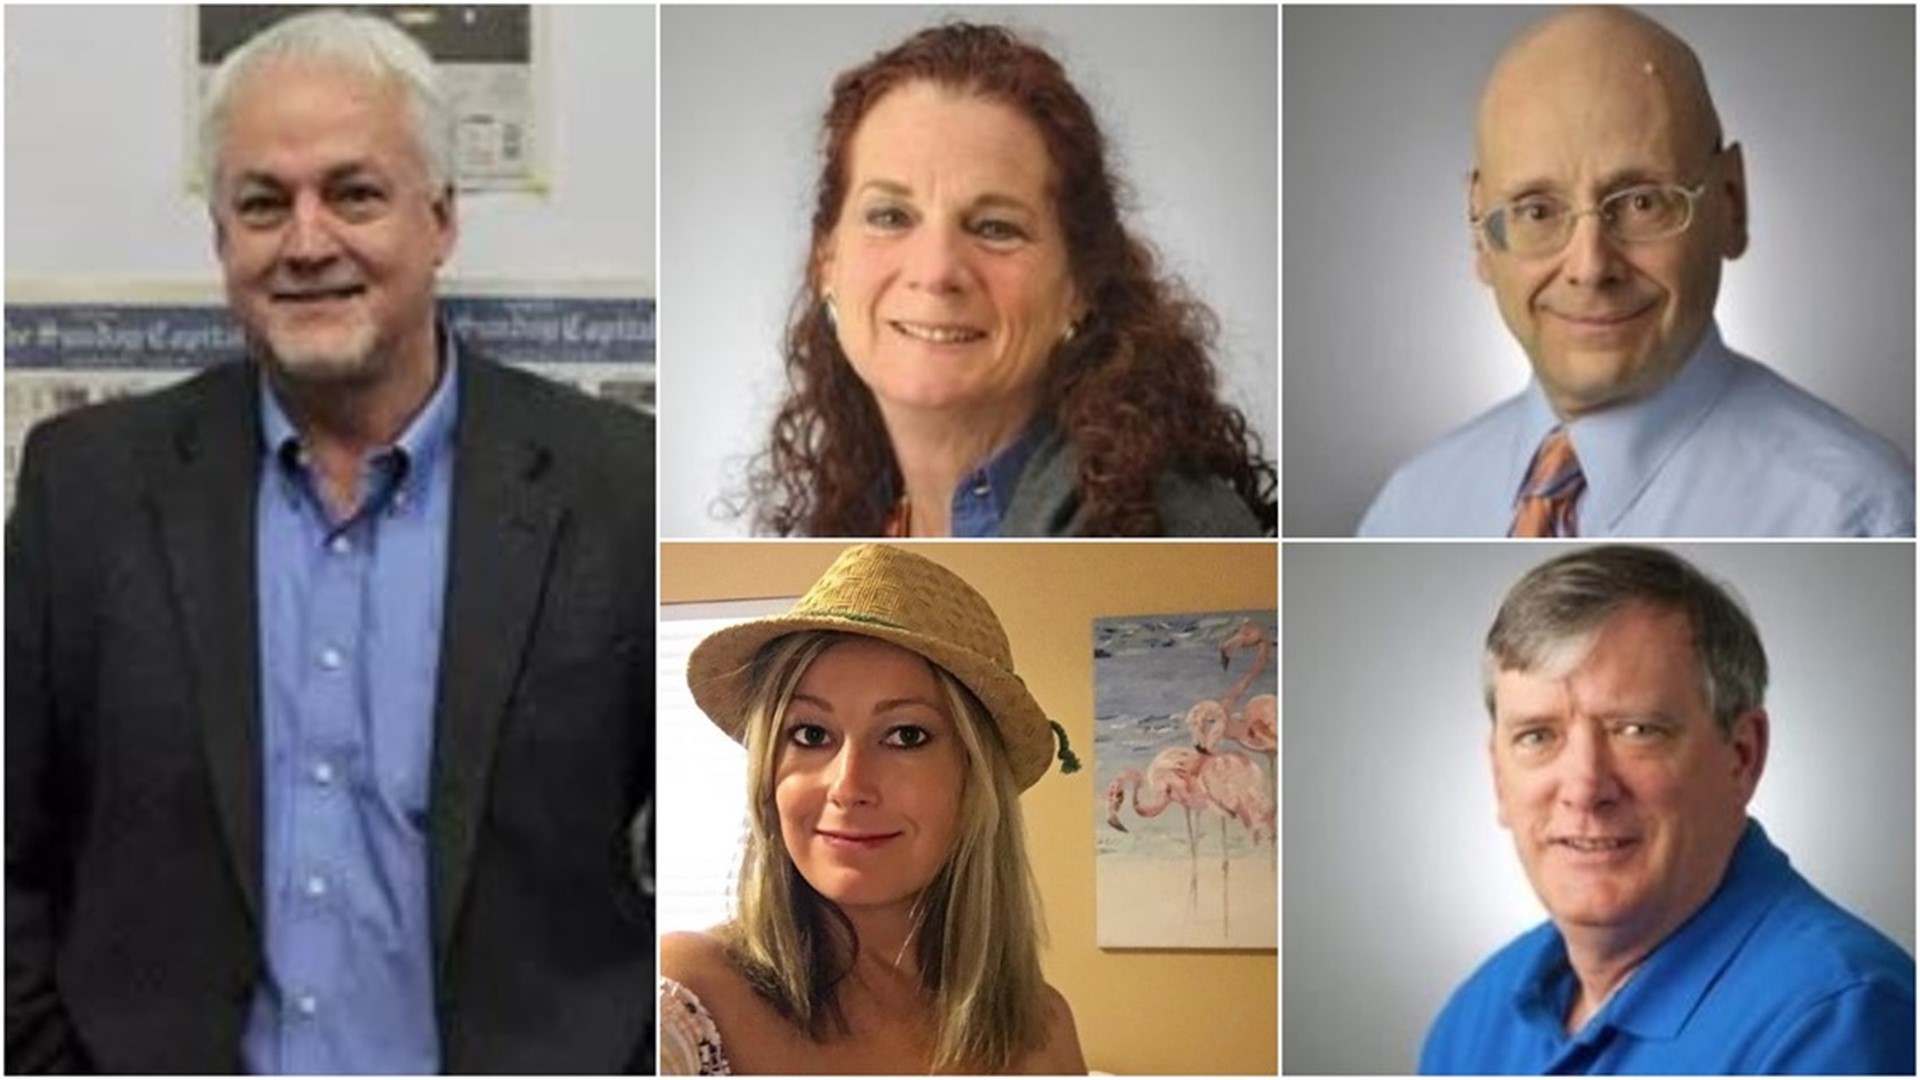 The staff at the Capital Gazette in Annapolis is being honored for its incredible work last year. A gunman stormed their newsroom in June of last year -- killing five employees. The staff reported on the violence, and what came next,  and never stopped working.